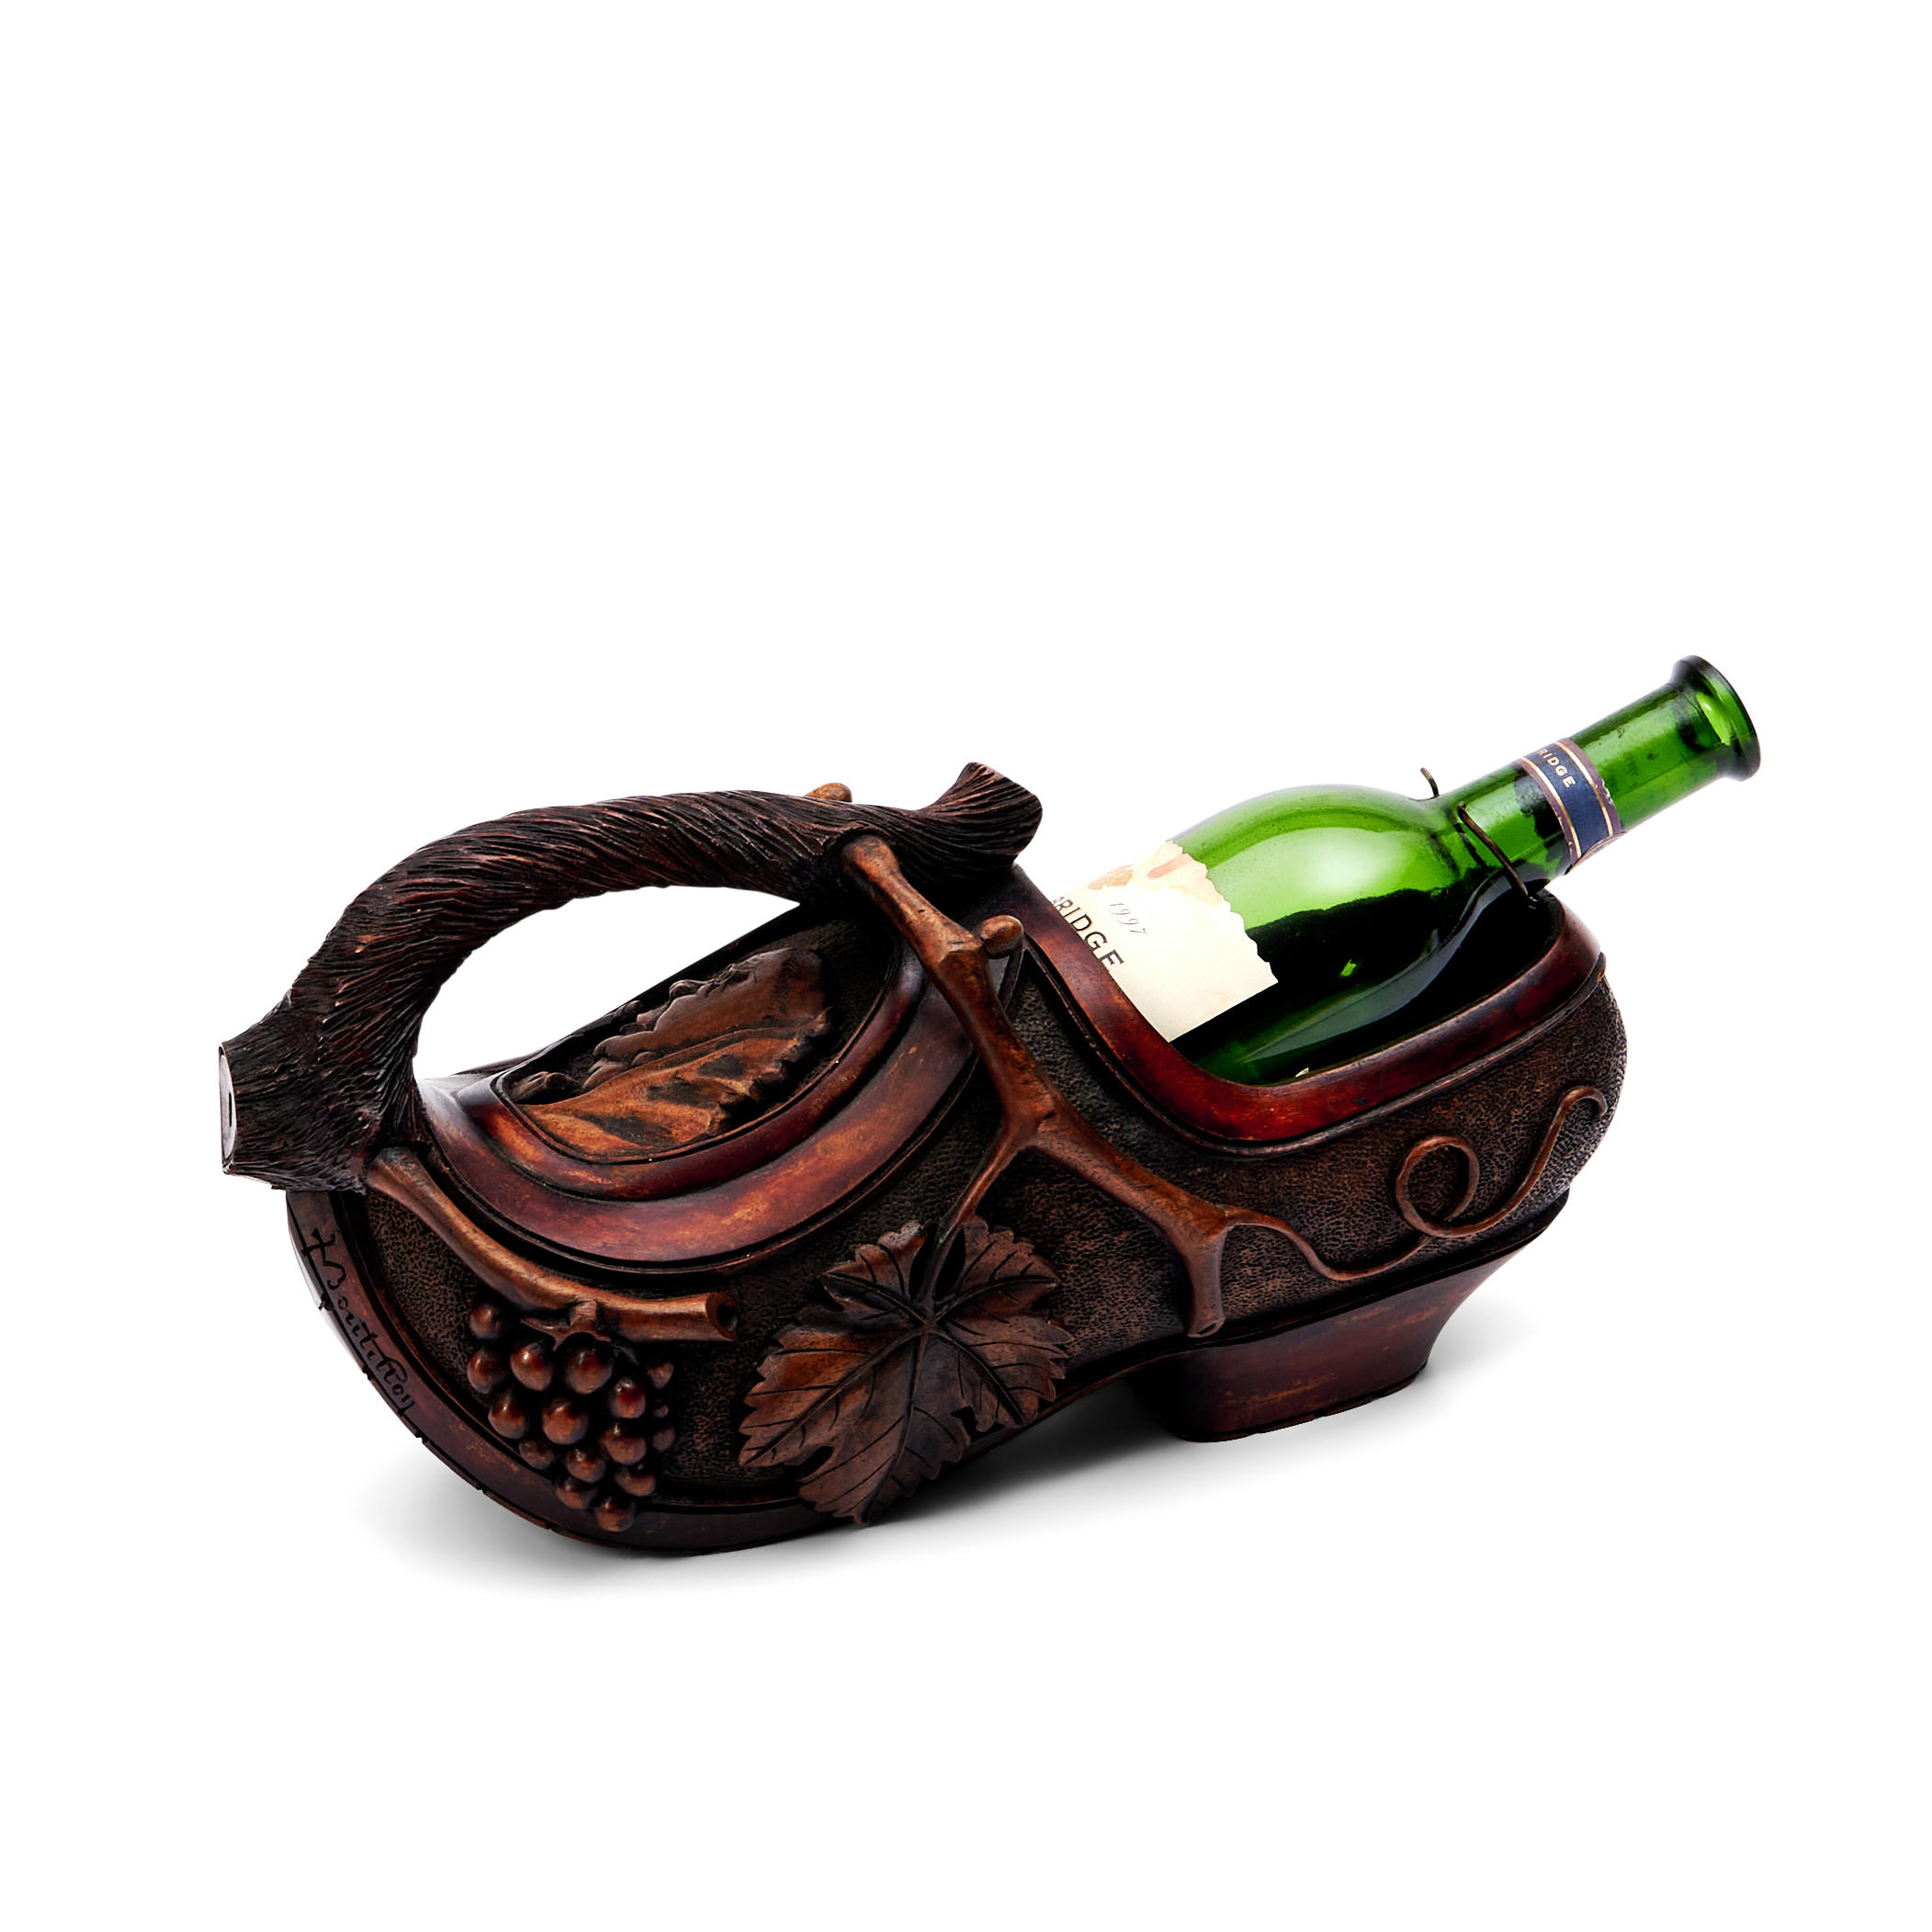 CARVED FRUITWOOD WINE CADDY, probably